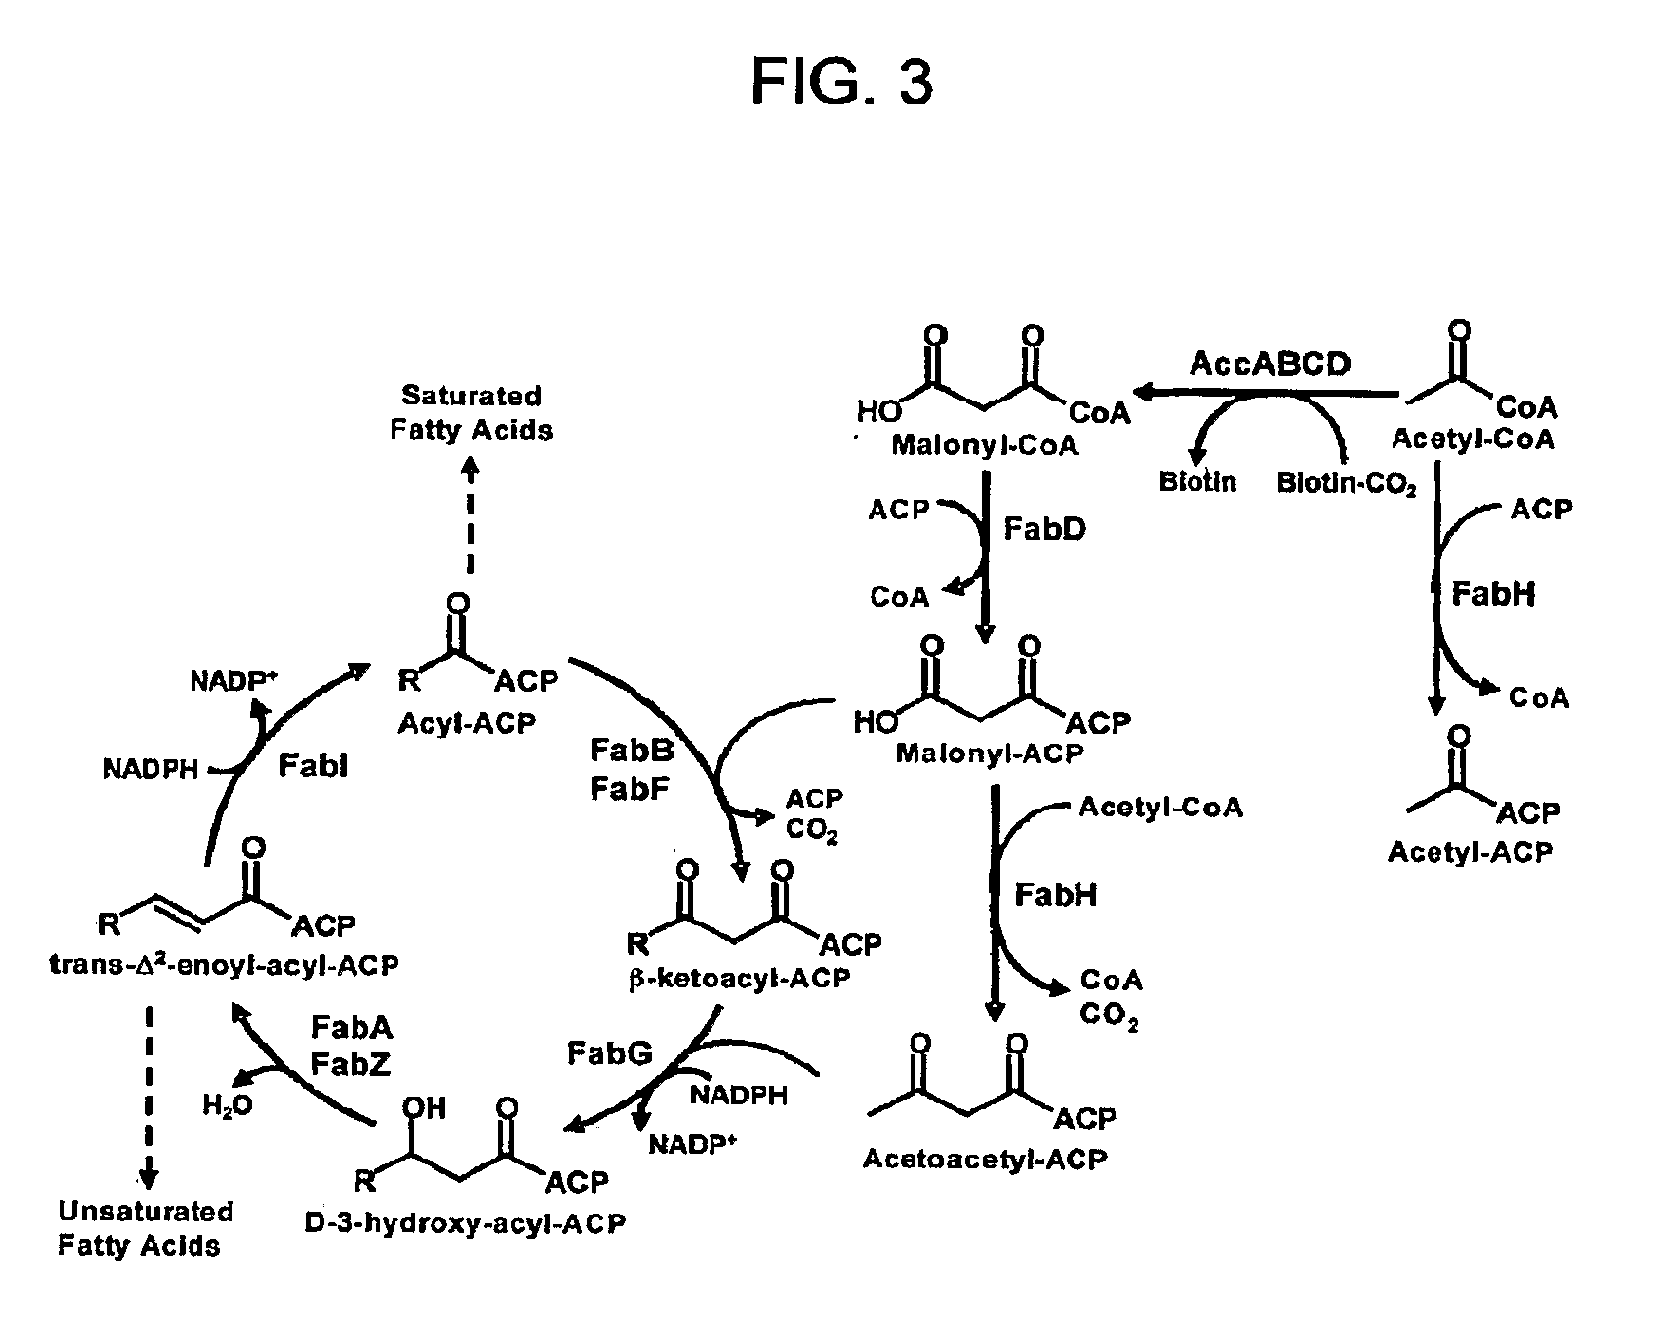 Methods for increasing isoprenoid and isoprenoid precursor production by modulating fatty acid levels